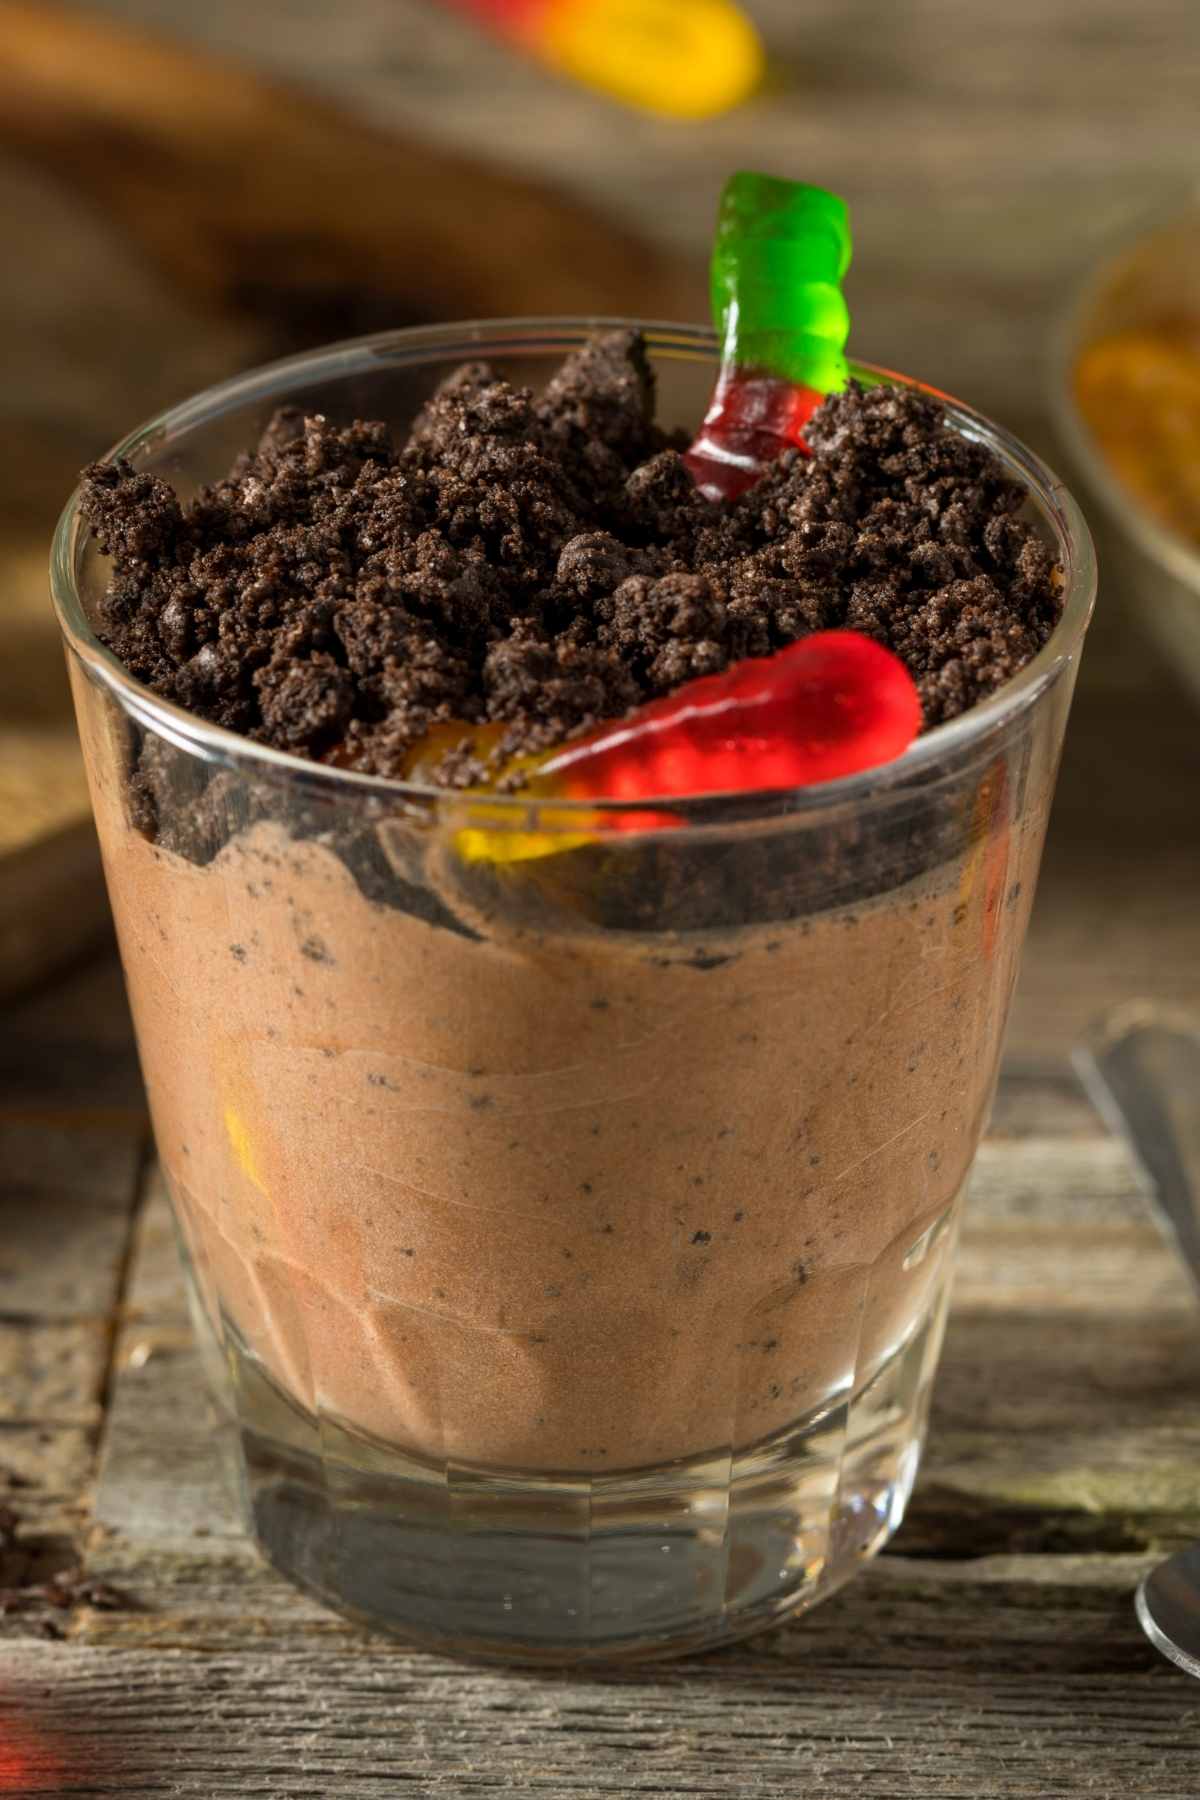 Treat the kids to a special dessert of Oreo Dirt Pudding! It’s a classic no-bake dessert that everyone loves!